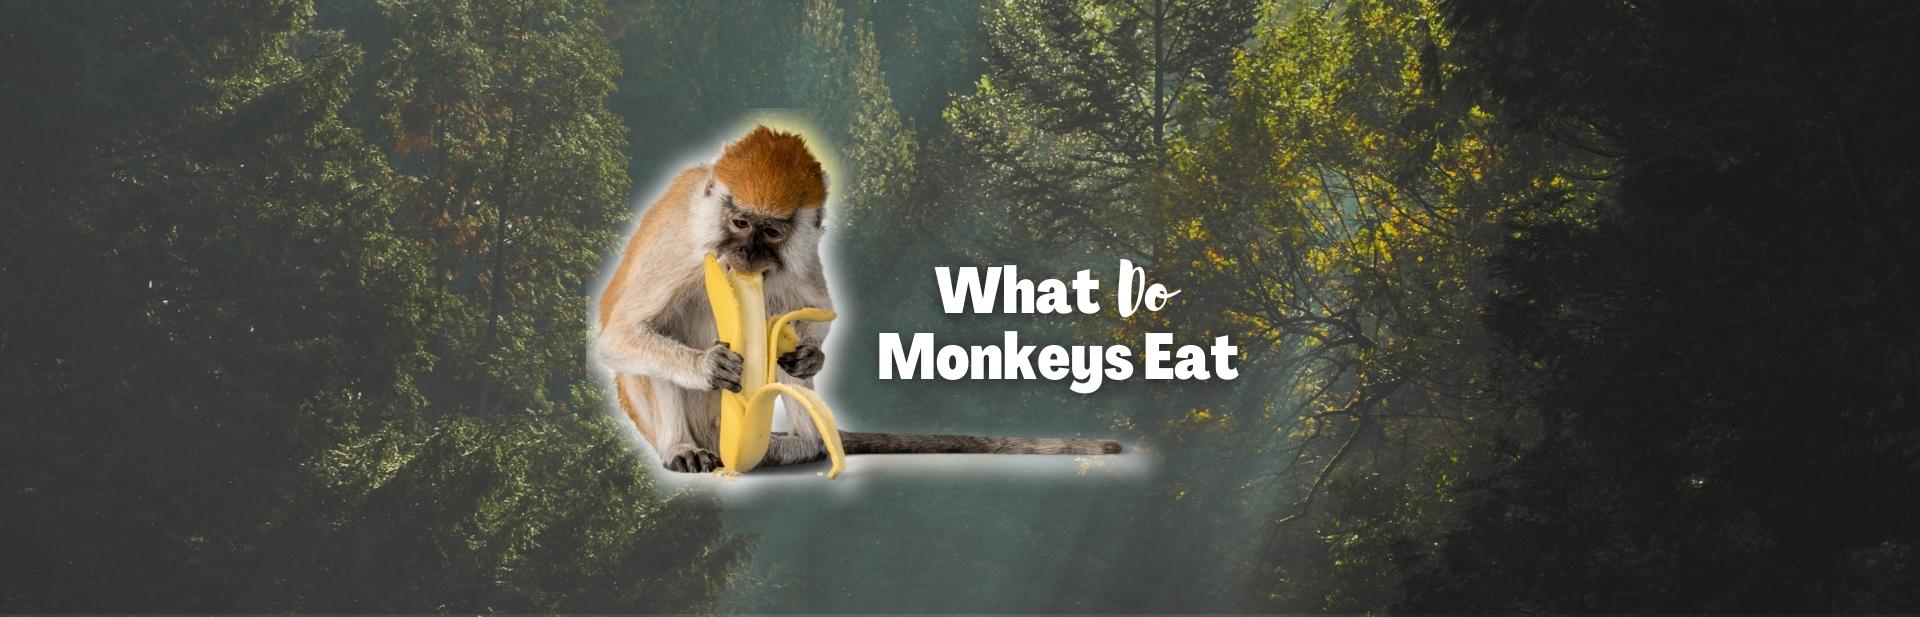 What Do Monkeys Eat? Discover the Surprising Truth Behind Their Omnivorous Diets